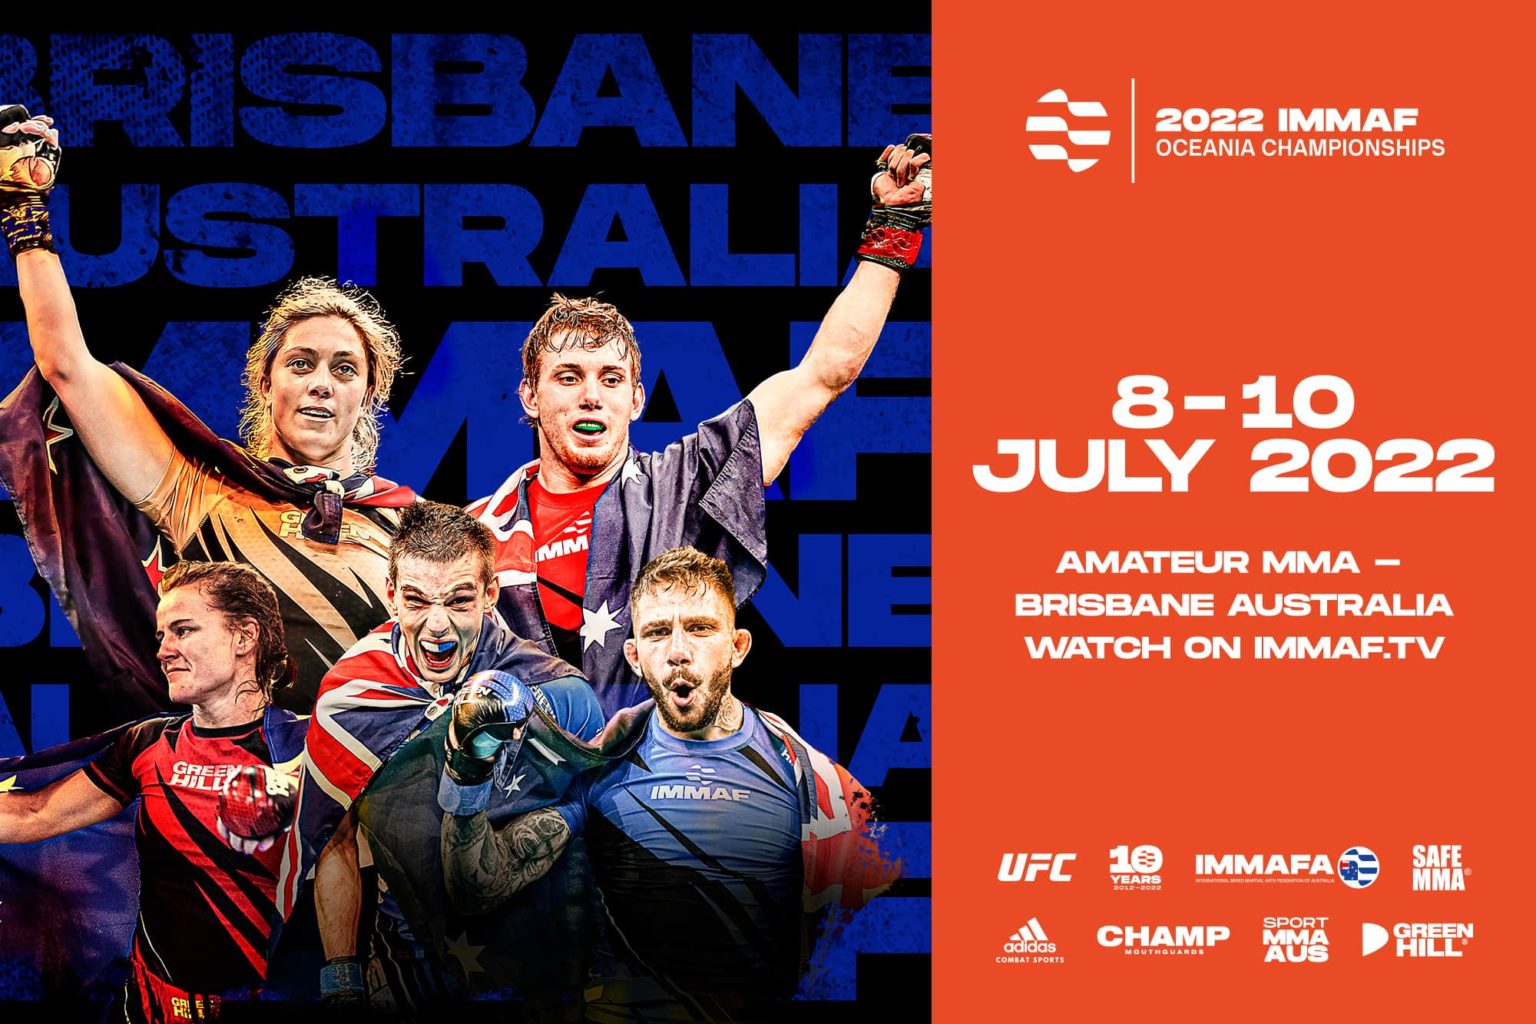 Immaf 2022 Immaf Oceania Championships Registration Opens